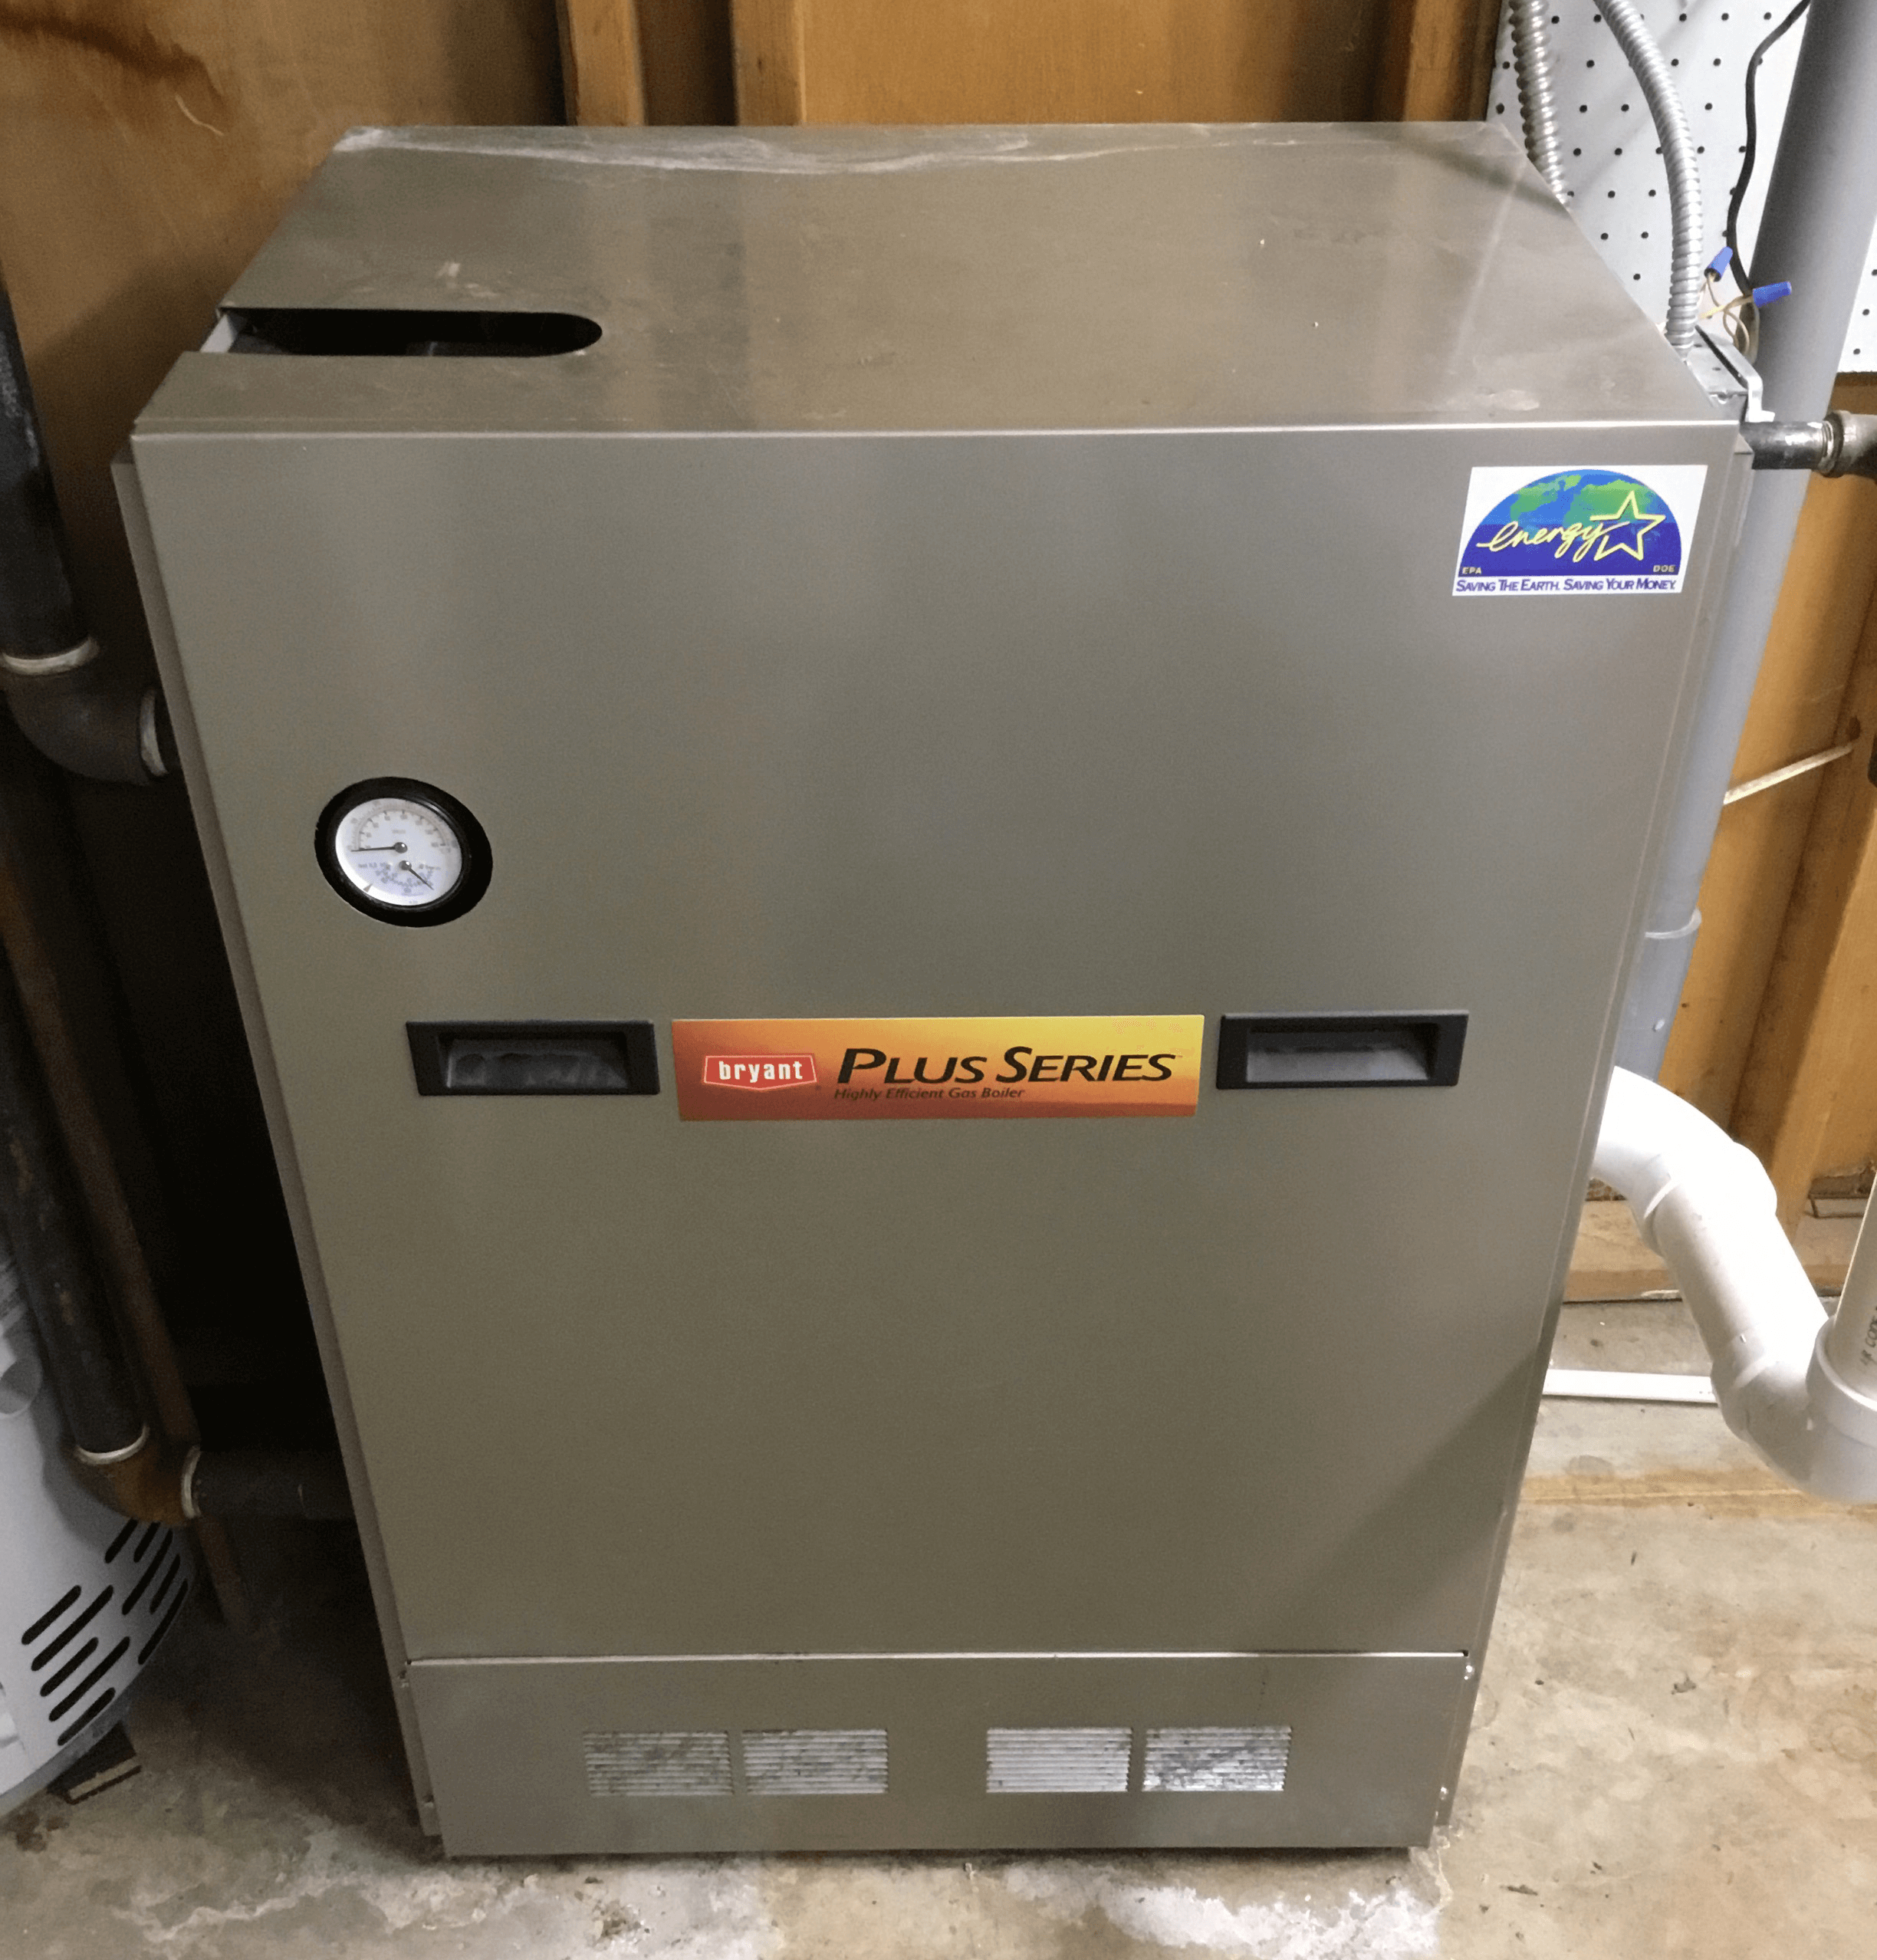 Image of old boiler, removed from a Toledo Ohio area basement. Maumee Valley Heating & Air Conditioning replaced this old boilder with an efficient new Bryant gas furnace.